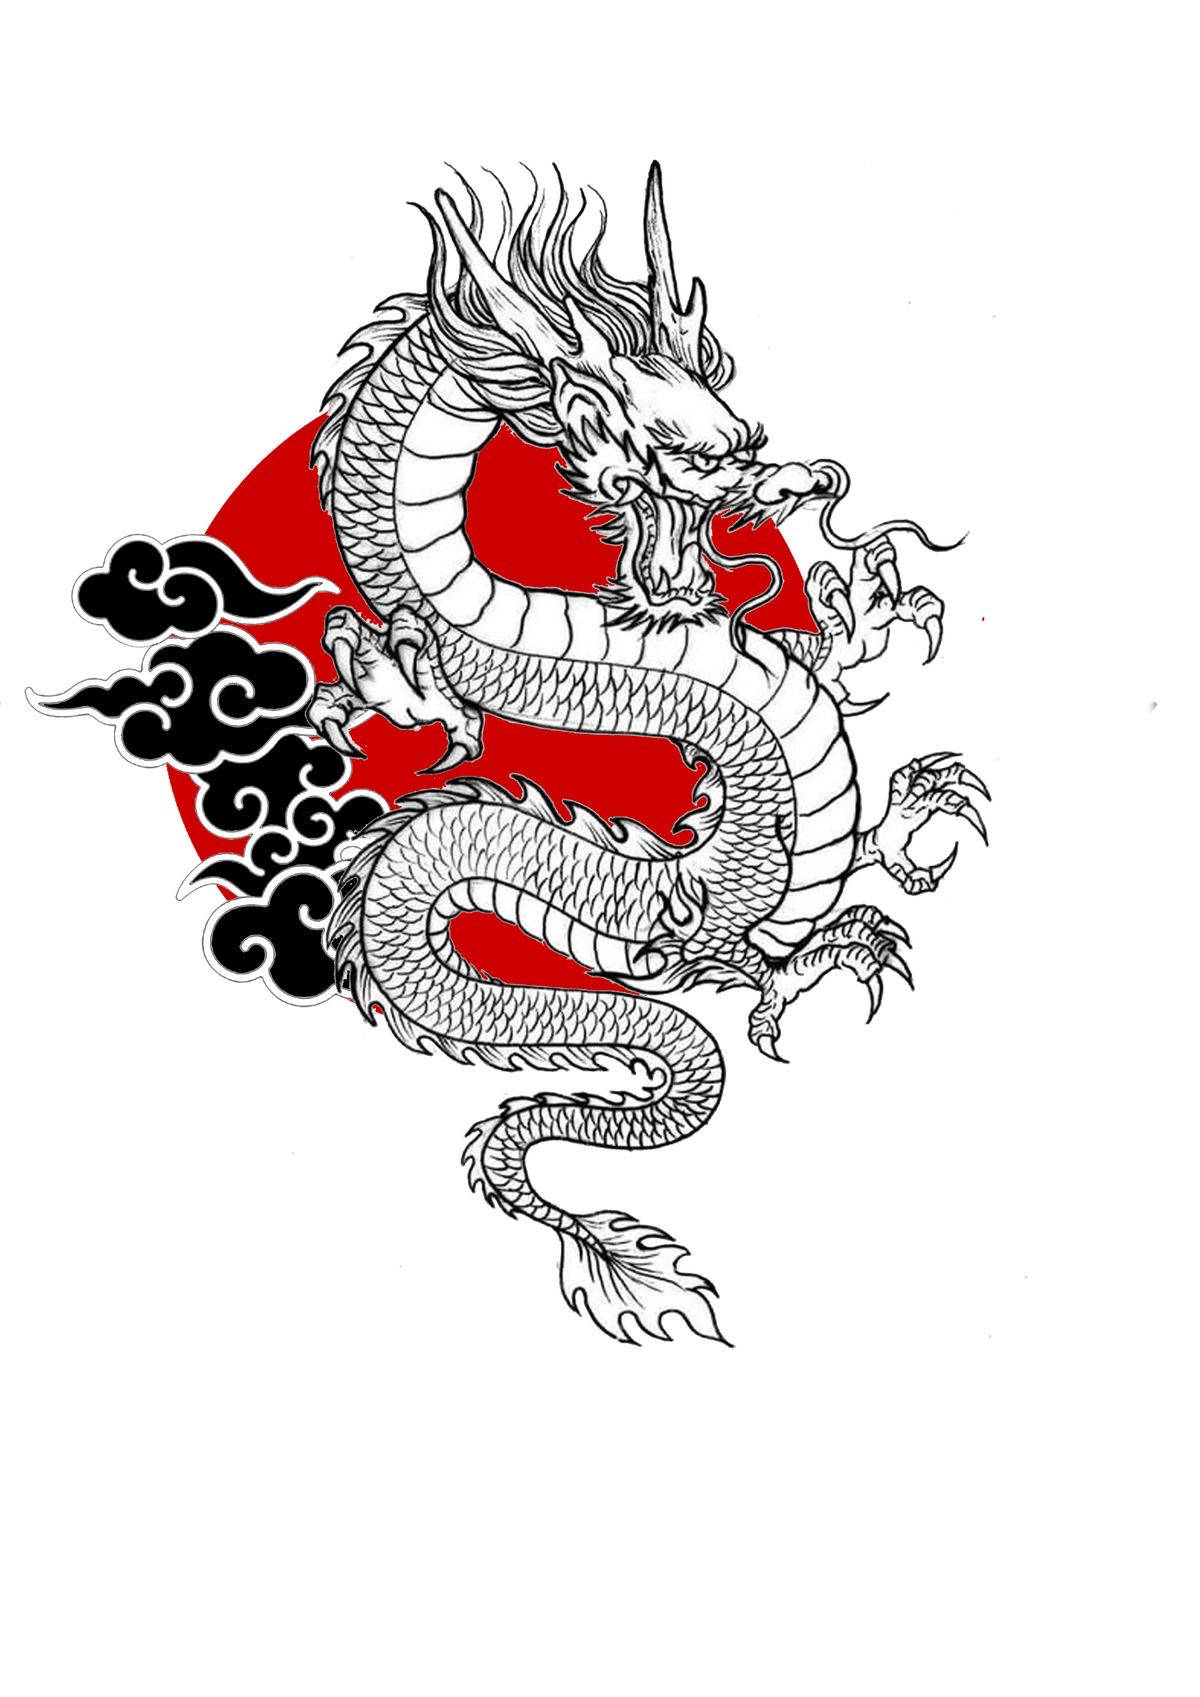 Caption: Ferocious Elegance - Majestic Japanese Dragon Tattoo In A Red Circle Wallpaper